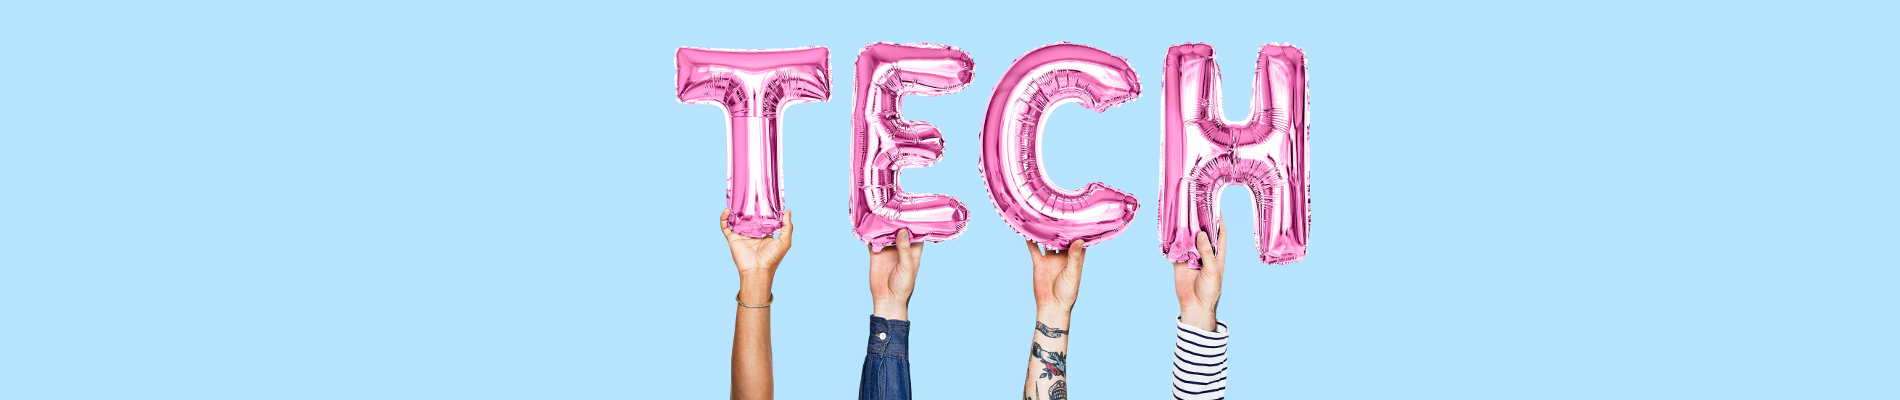 Top 7 women in tech – a completely subjective list